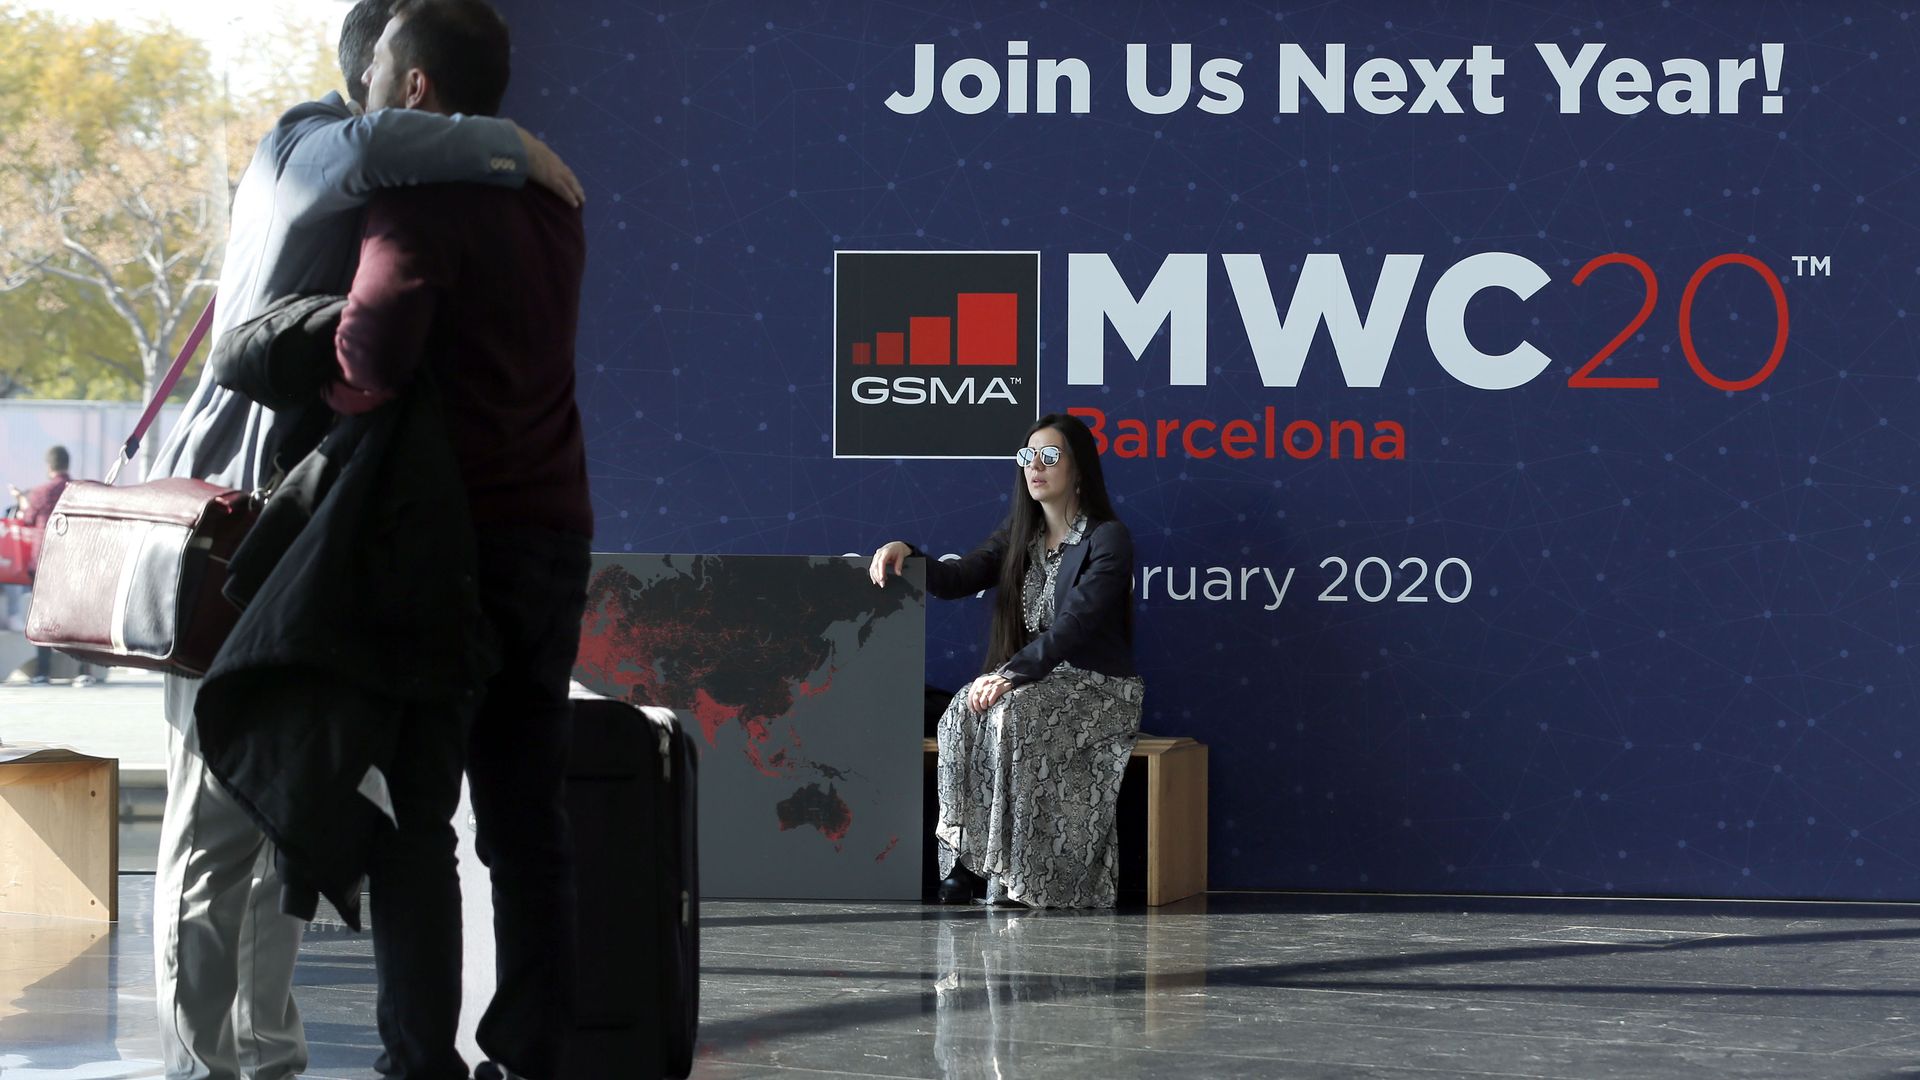 A sign from Mobile World Congress 2019  touting this year's event